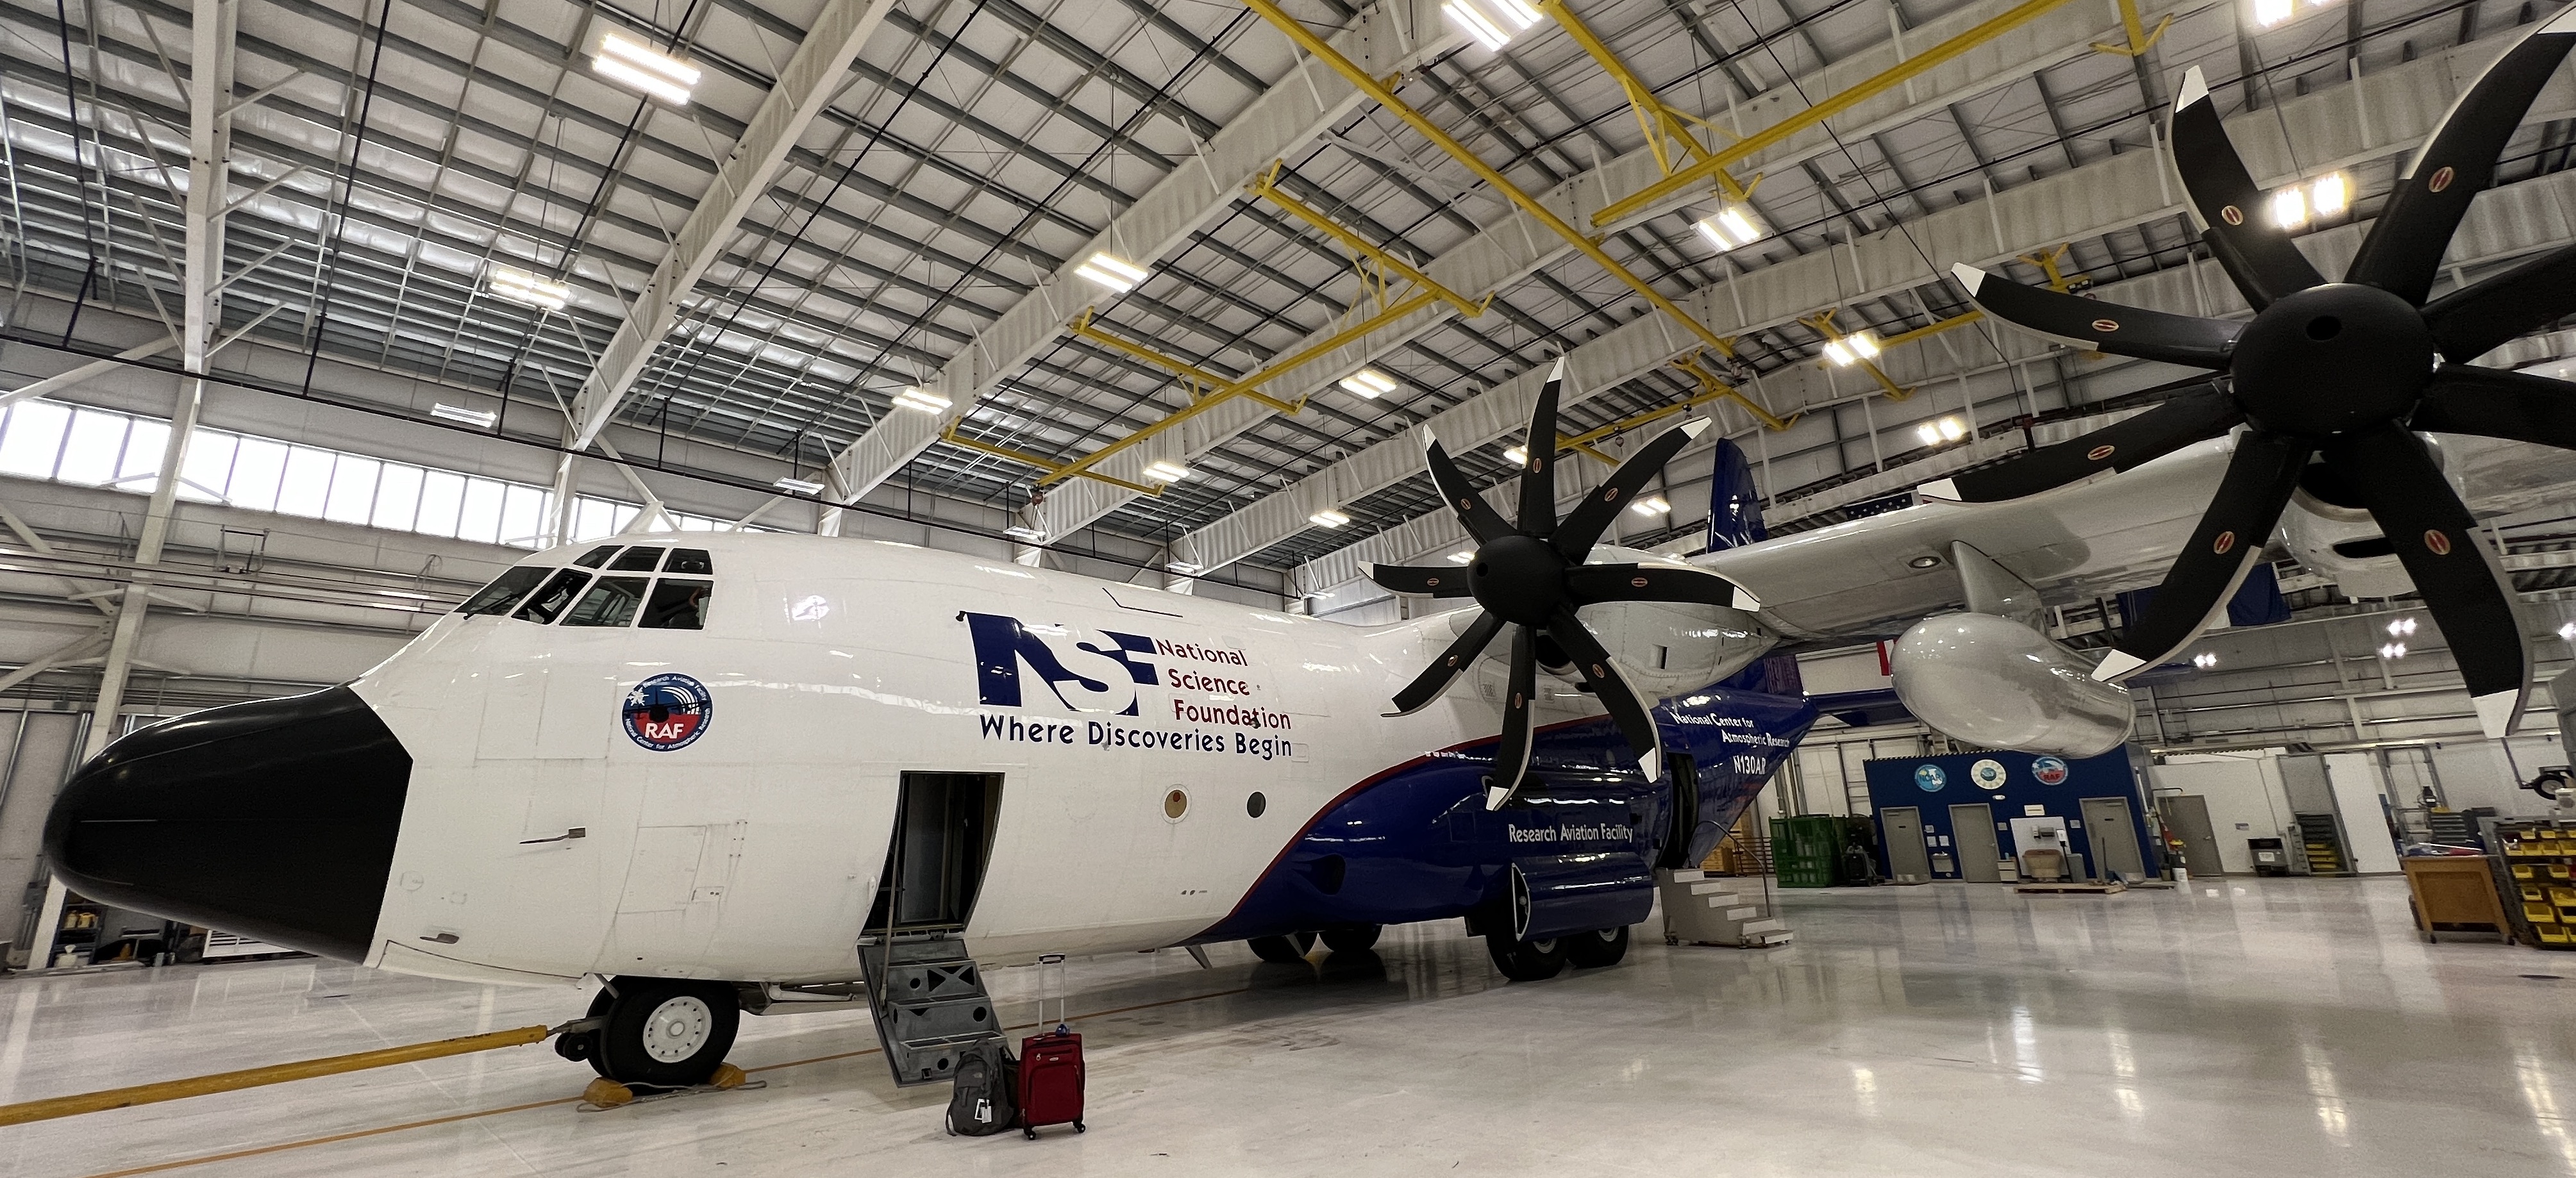 The NSF/NCAR C-130 sits in its hangar at the Research Aviation Facility in Broomfield, Colo. NCAR's new Airborne Phased Array Radar (APAR) will be mounted on this C-130 and made available to the university research community.